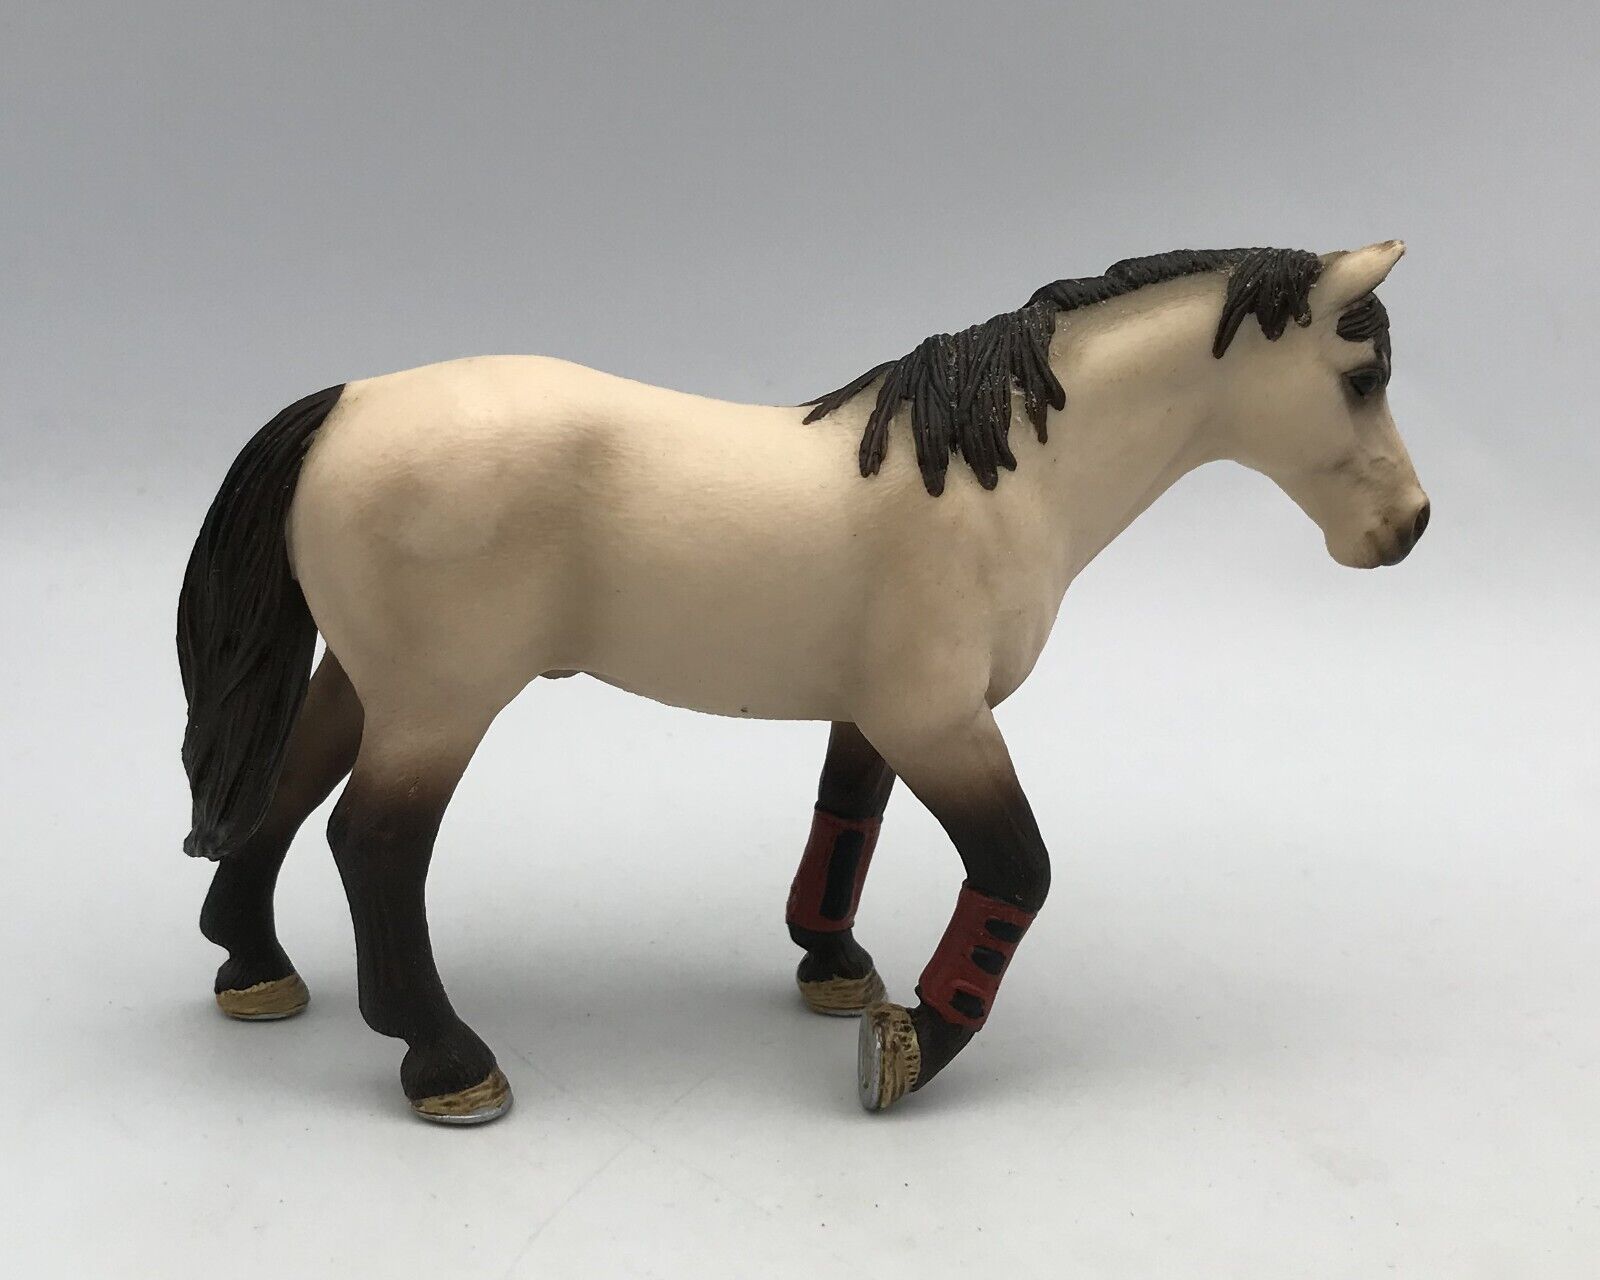 Schleich TRAINED HORSE Pony Animal 13706 Retired Figure 2011